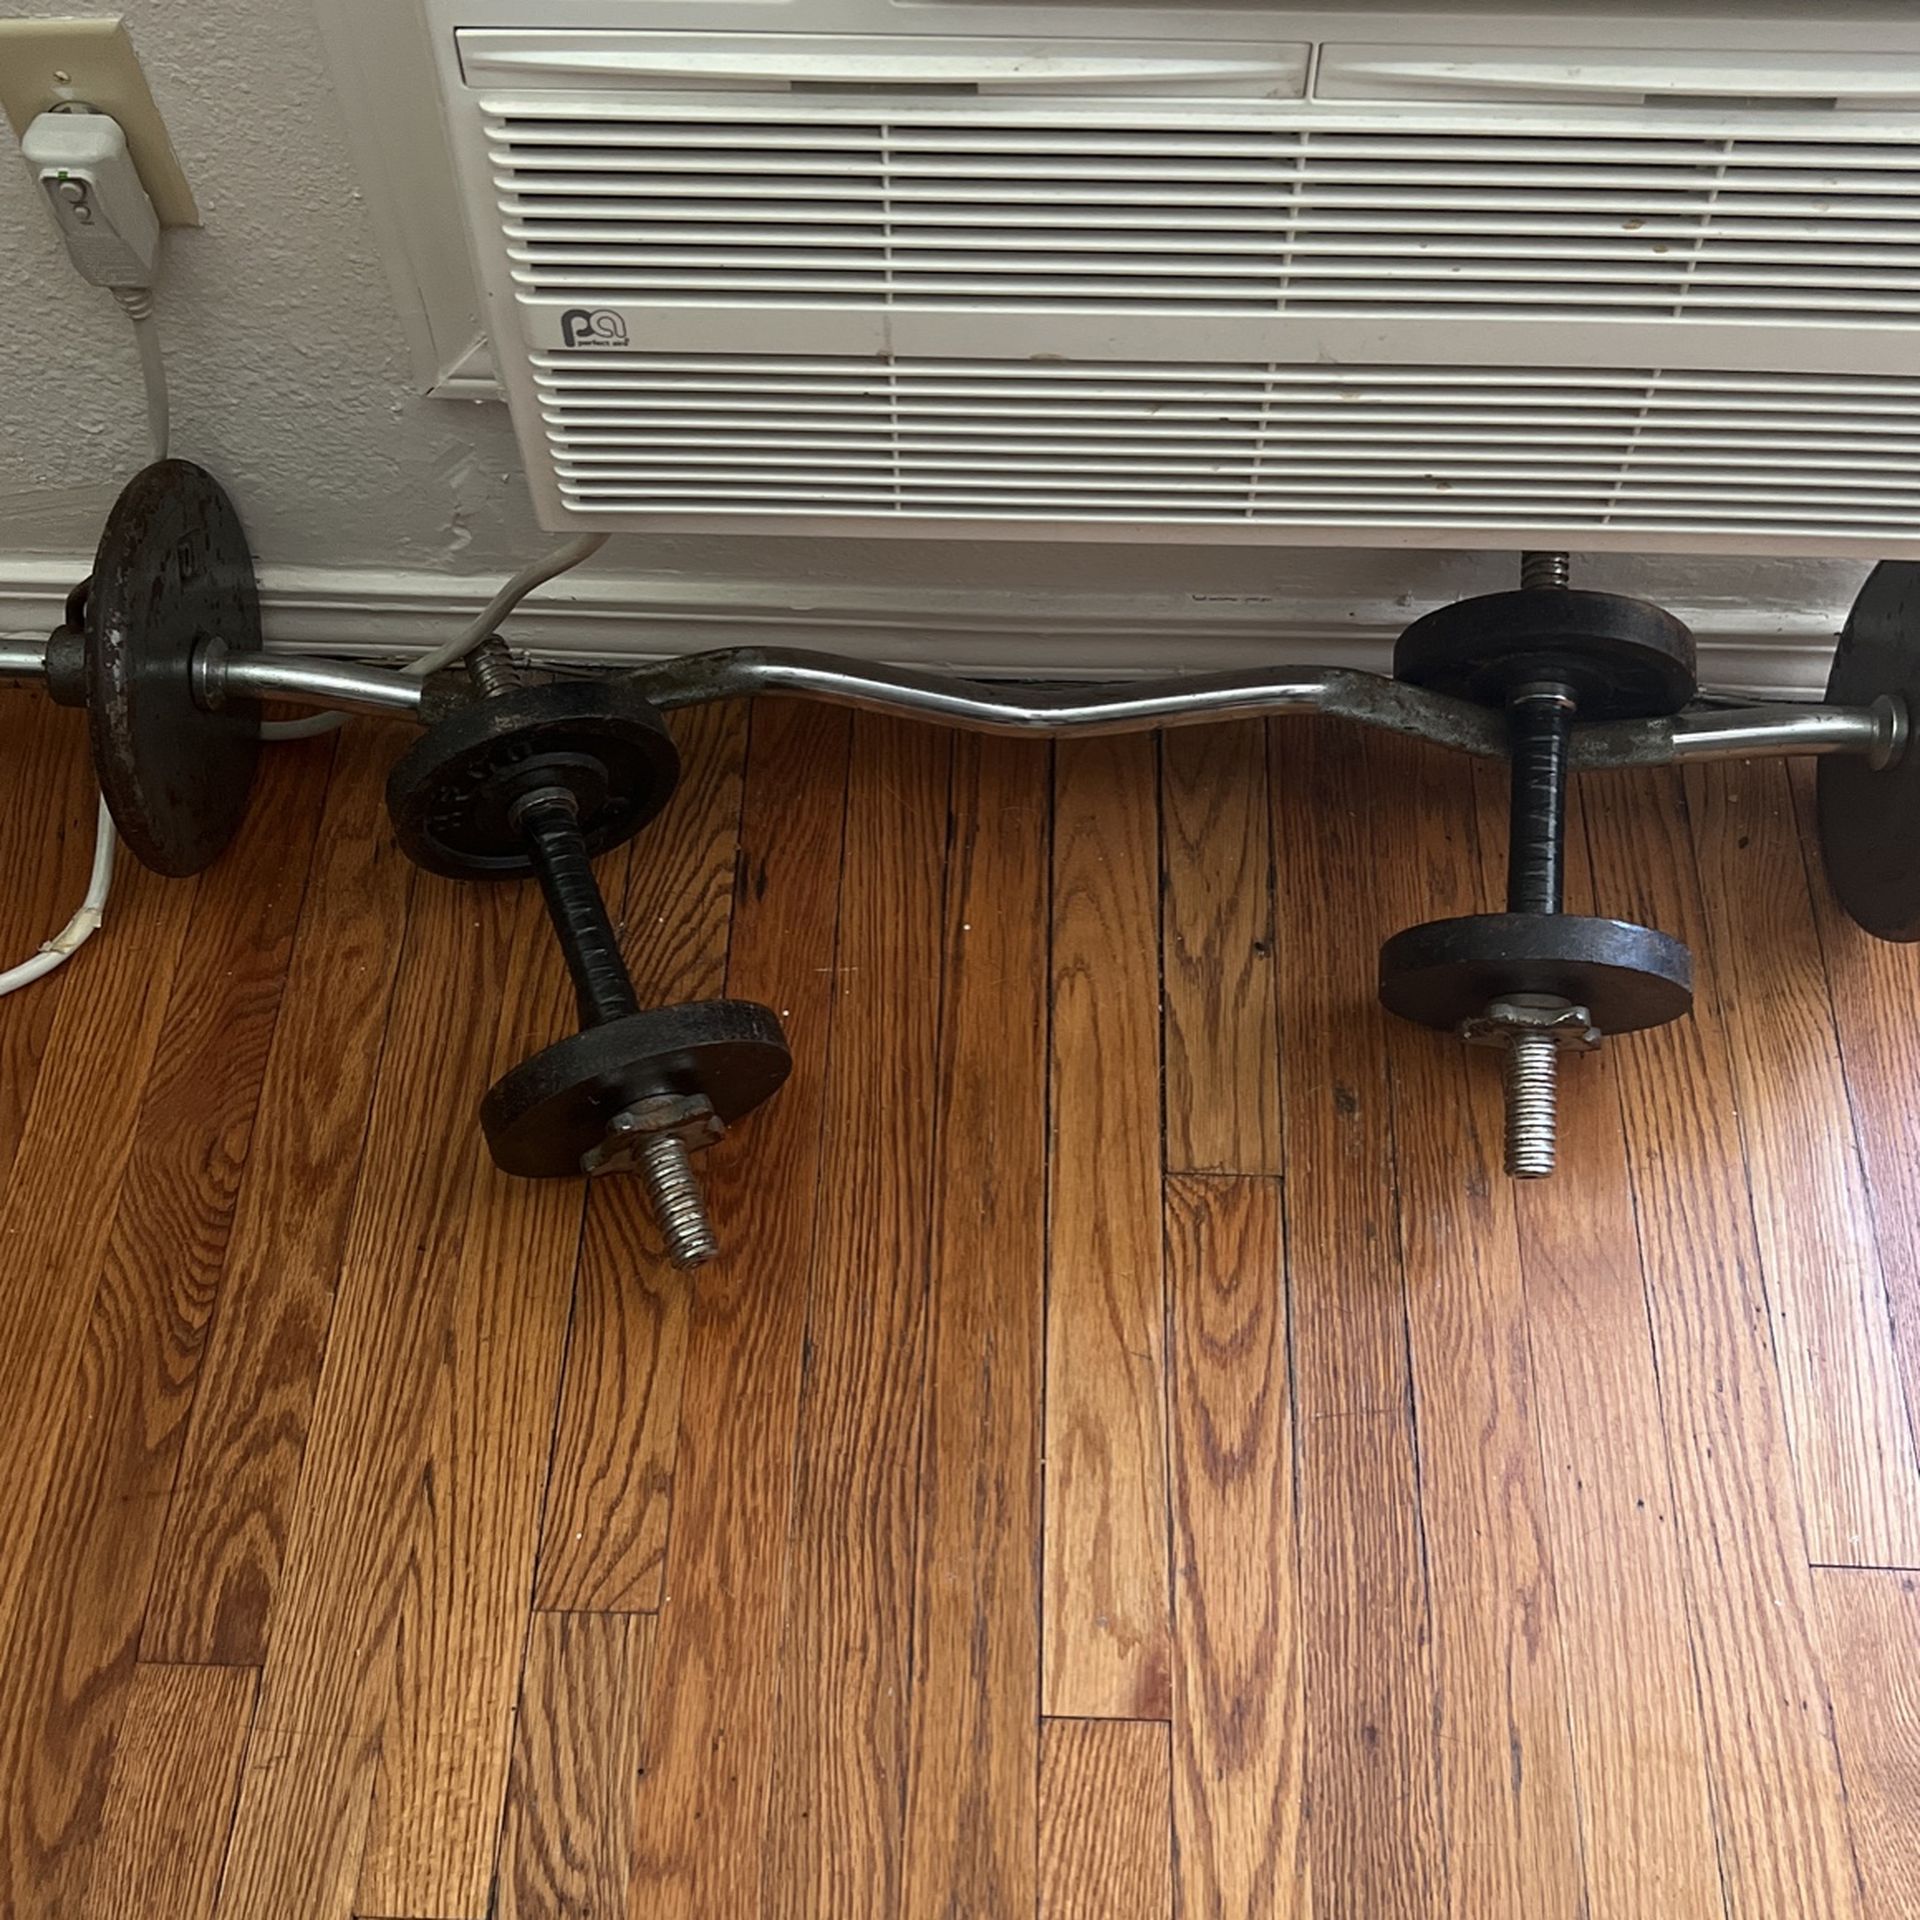 Curling bar to dumbbells hundred pounds in plates varying from 5 pounds to 10 pounds